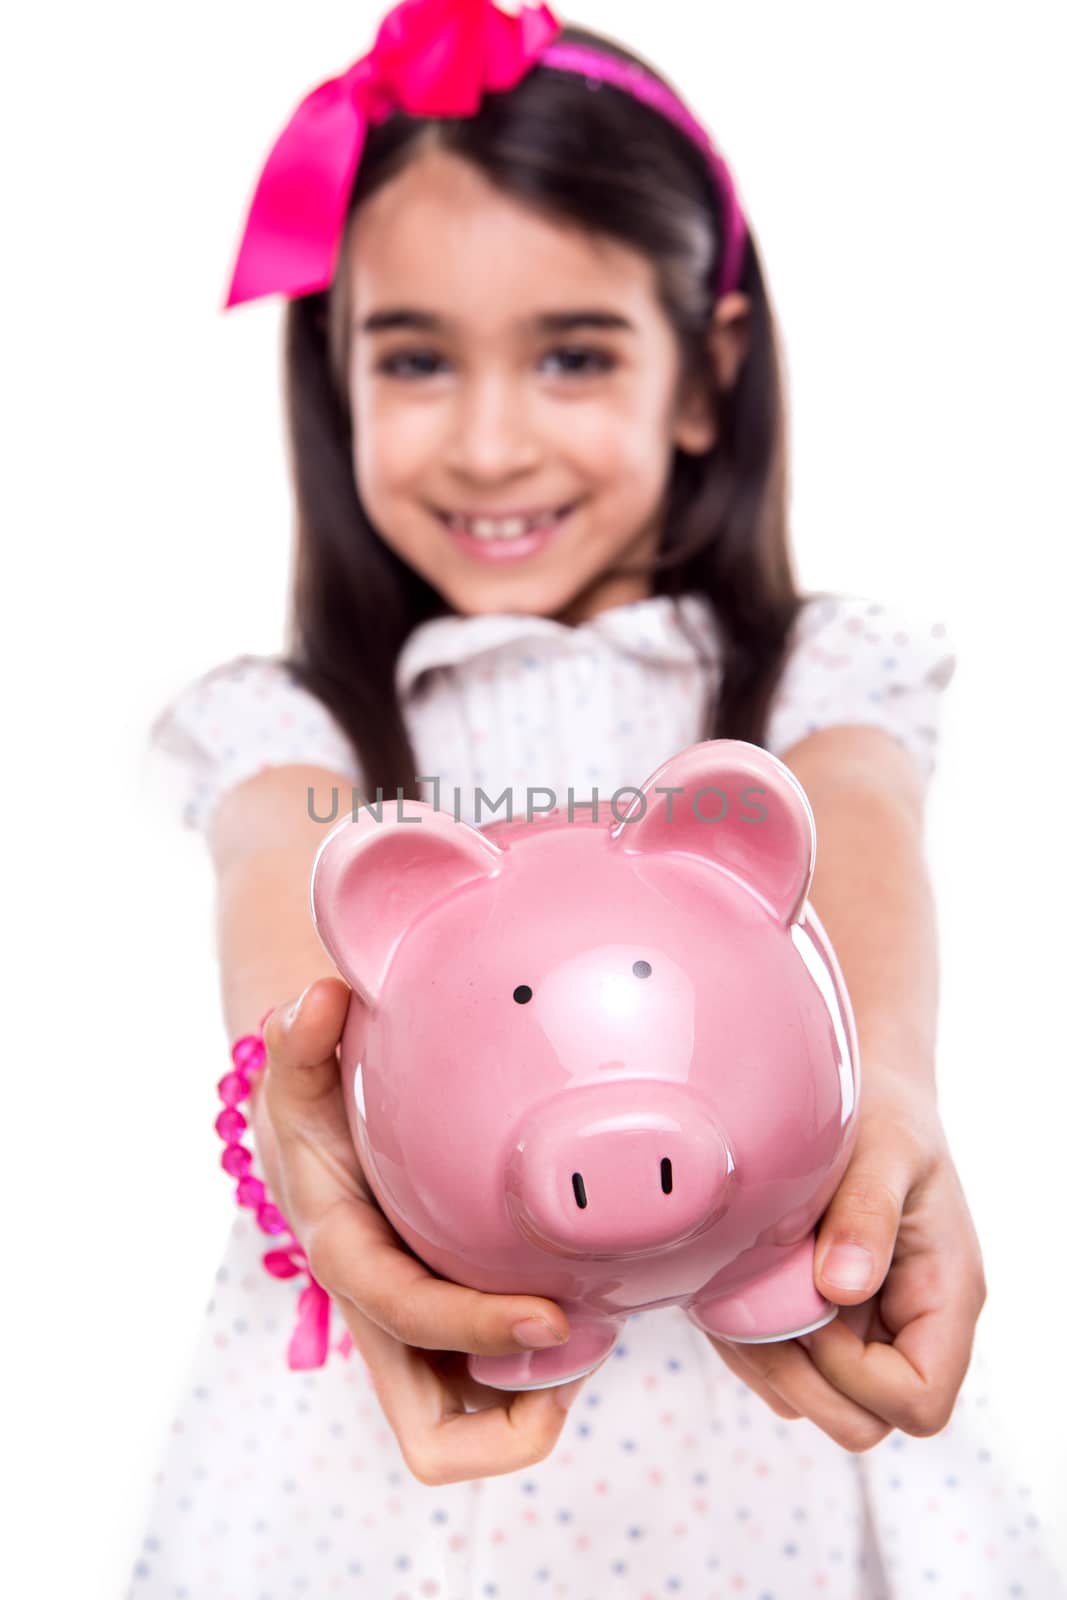 Young girl holding a piggy bank over white background - Selective focus on piggy bank